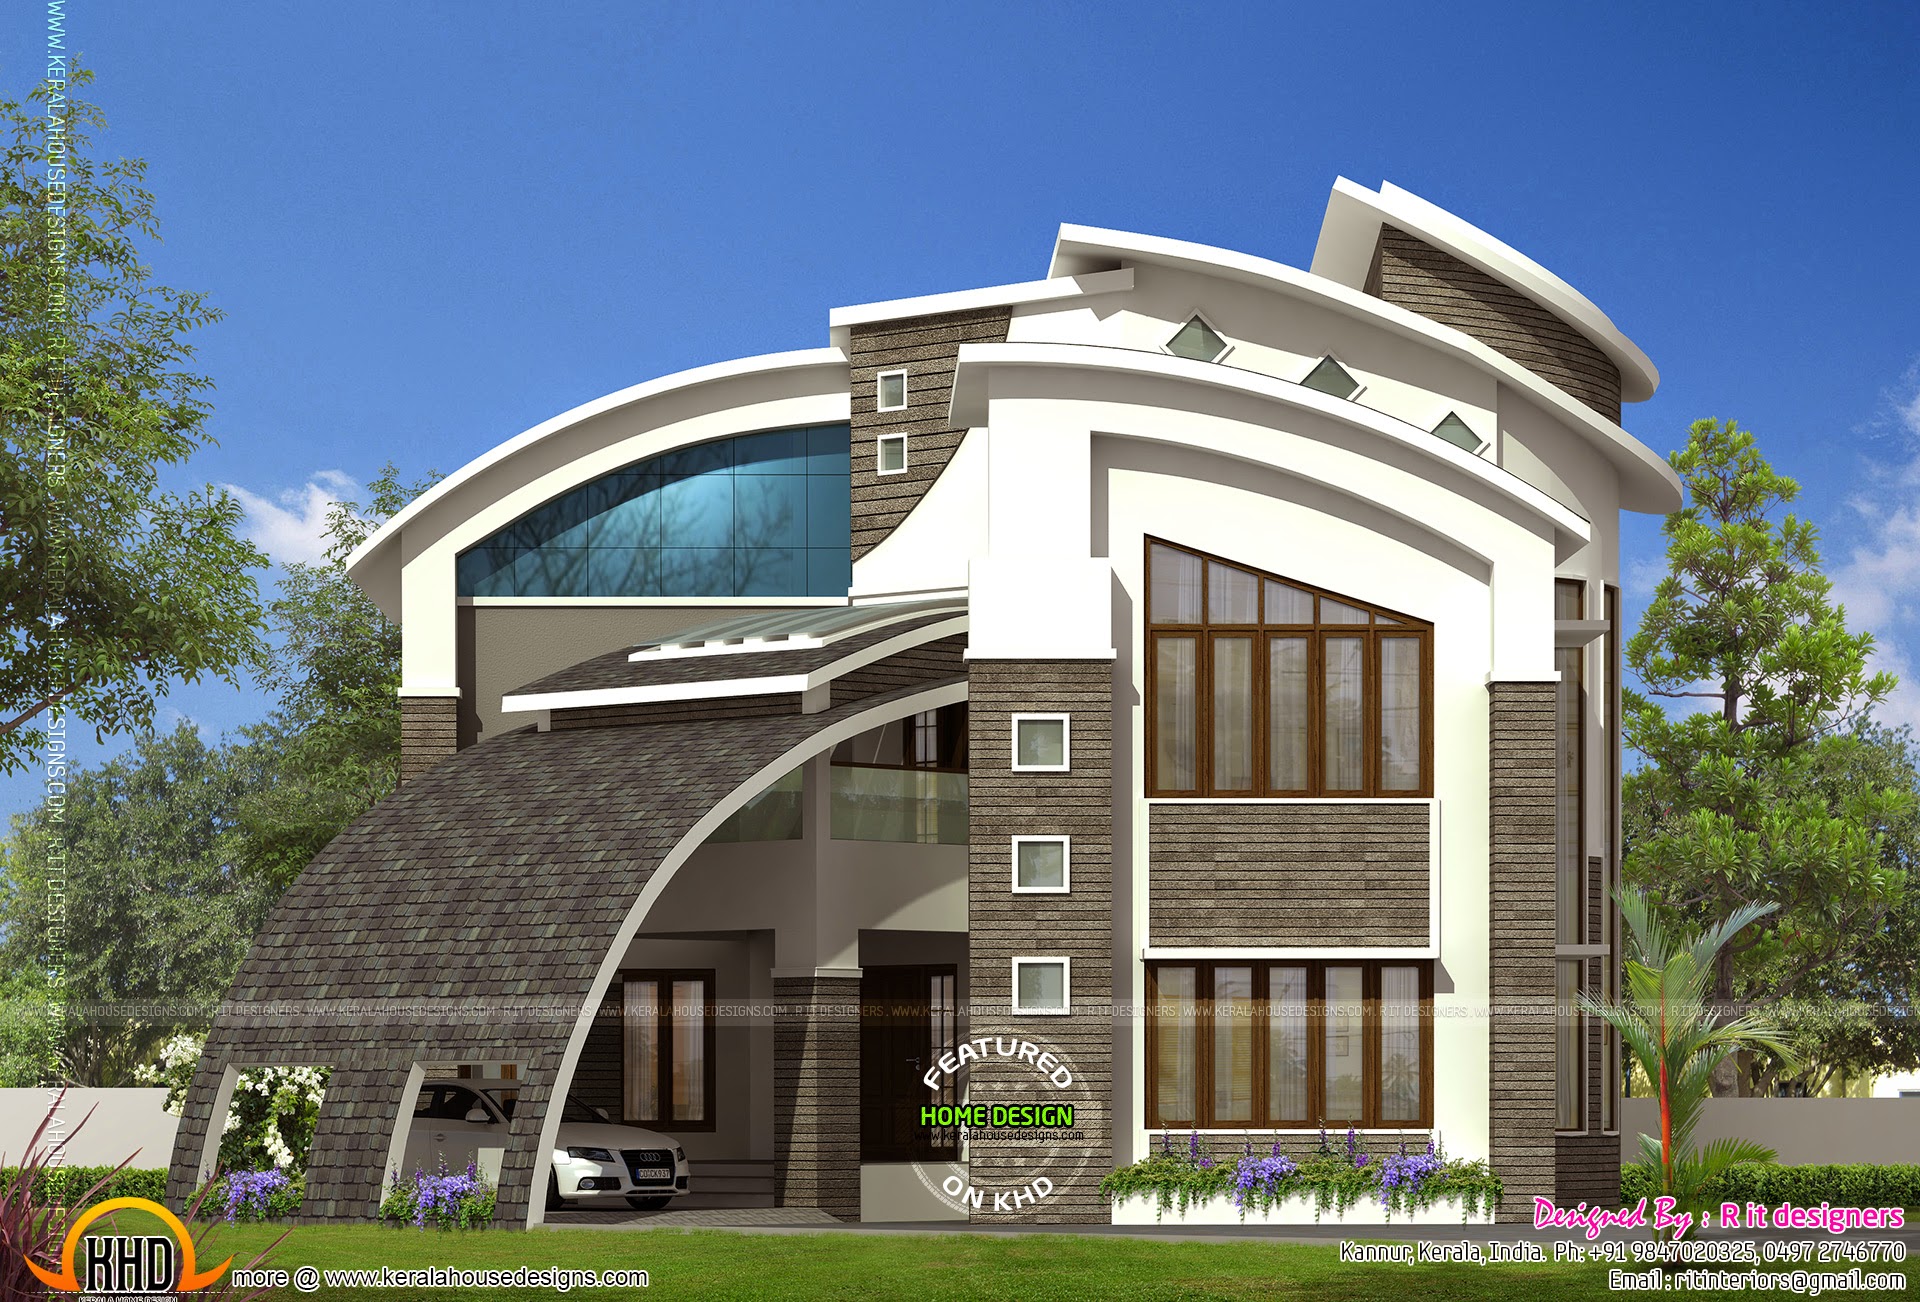 Most modern contemporary house design - Kerala home design and floor